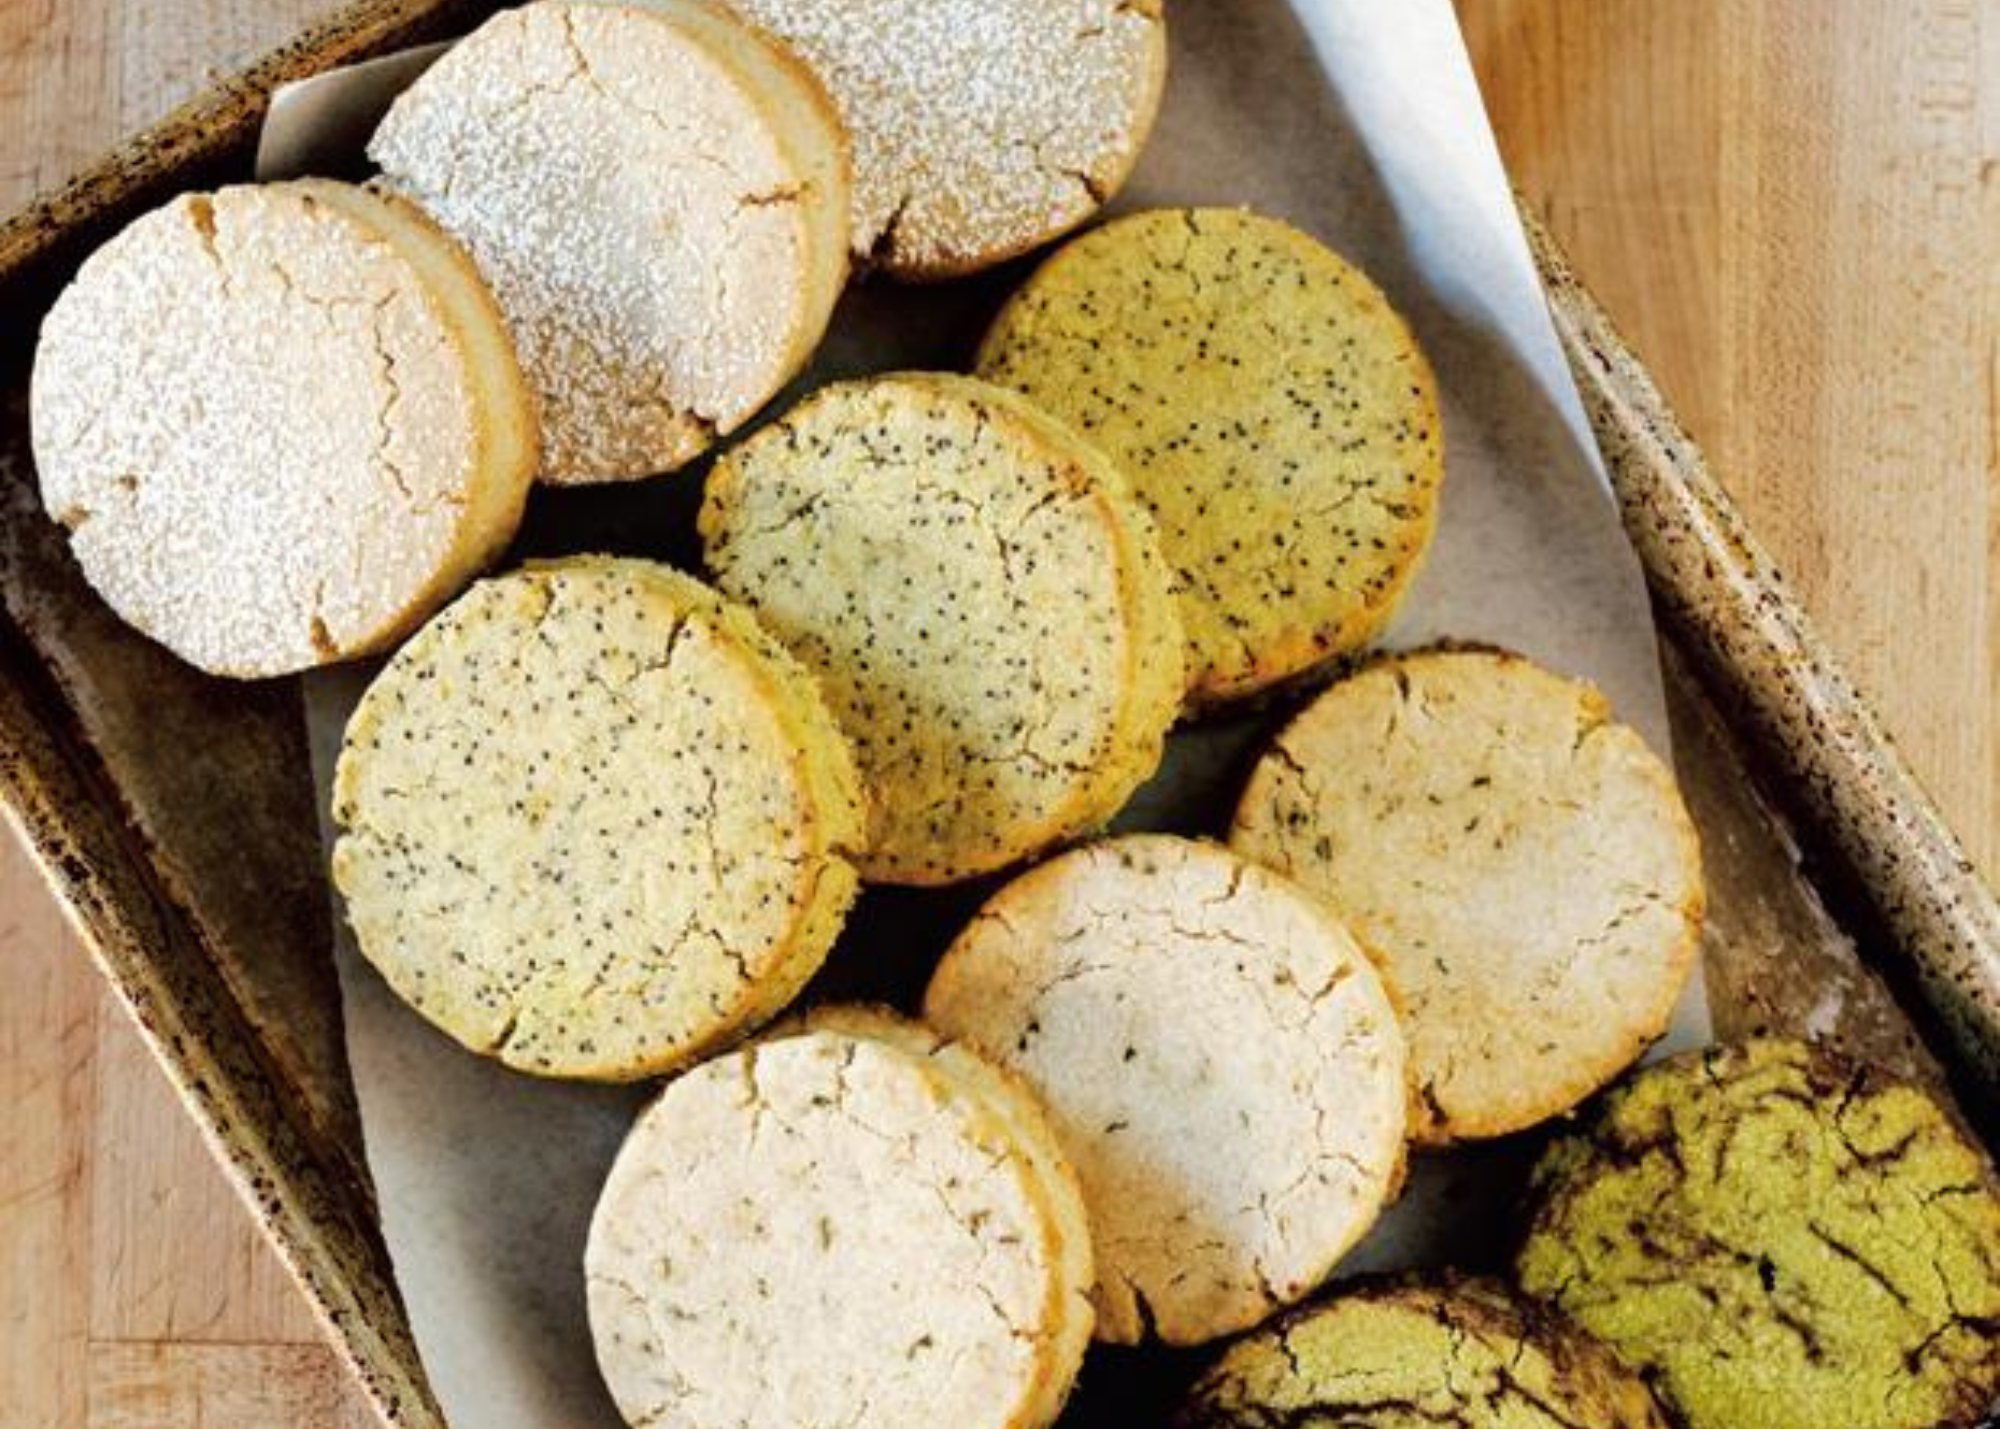 Professional Baker Teaches You How To Make SCOTTISH SHORTBREAD! 